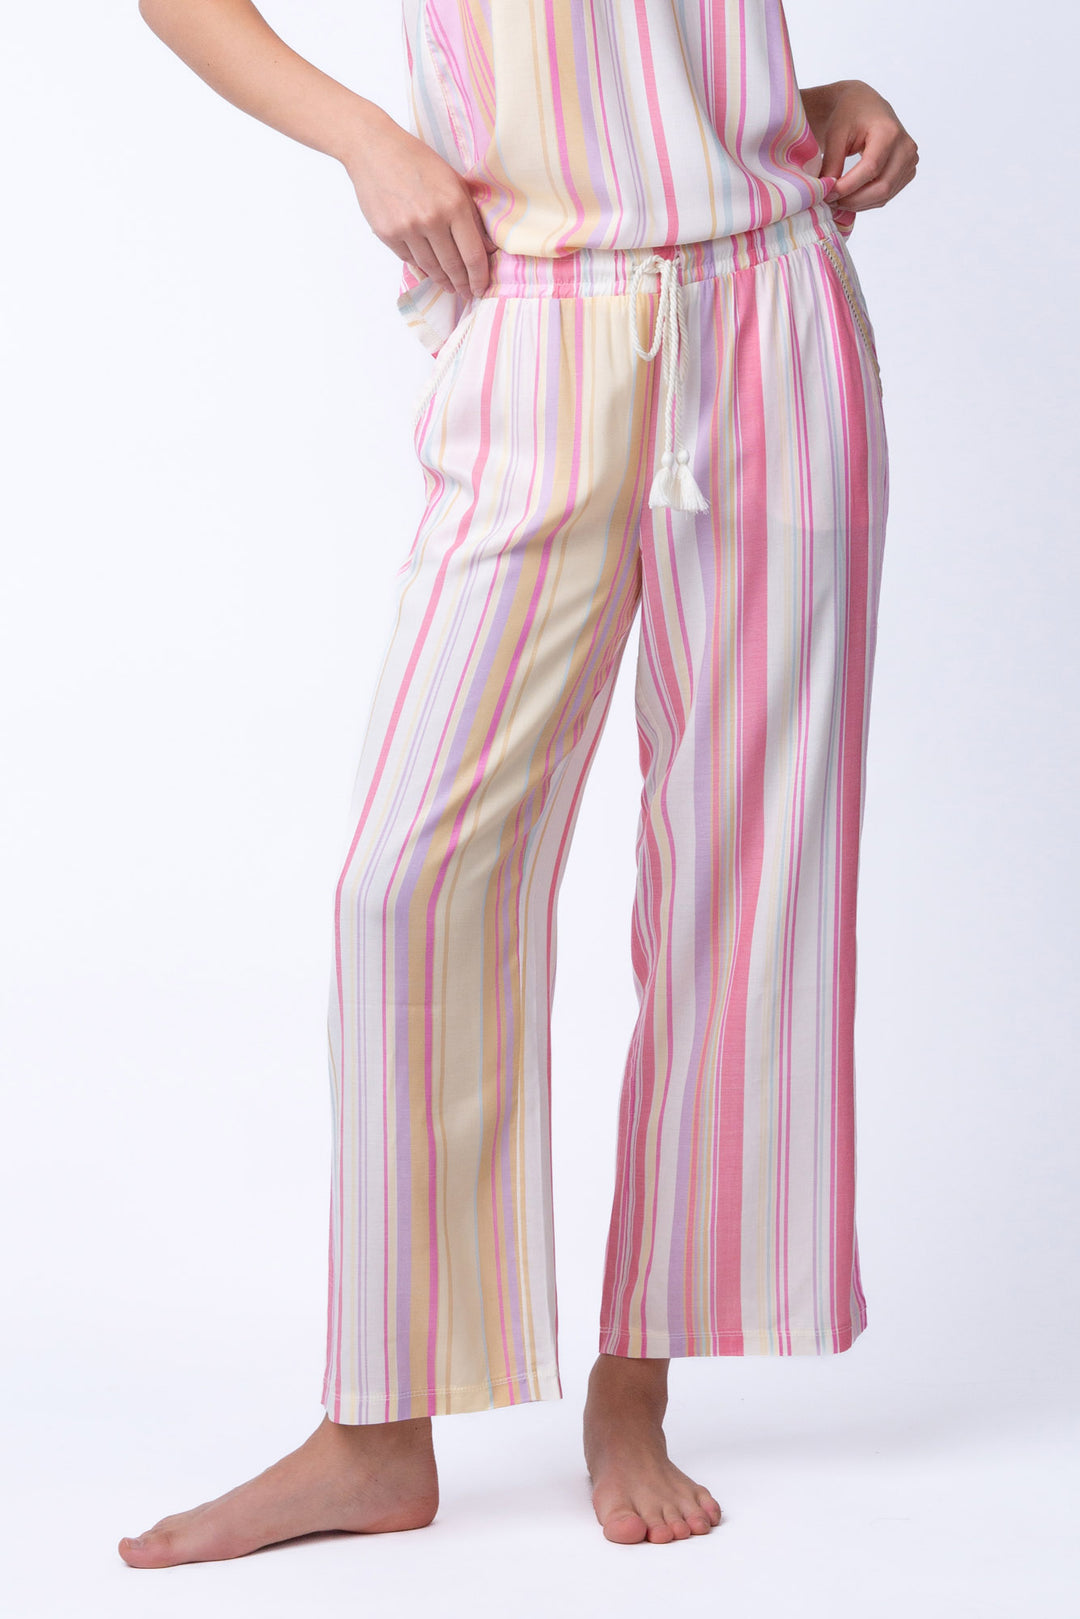 Women's striped lounge pant in pink-peach-natural. Cropped pant & tie waist.